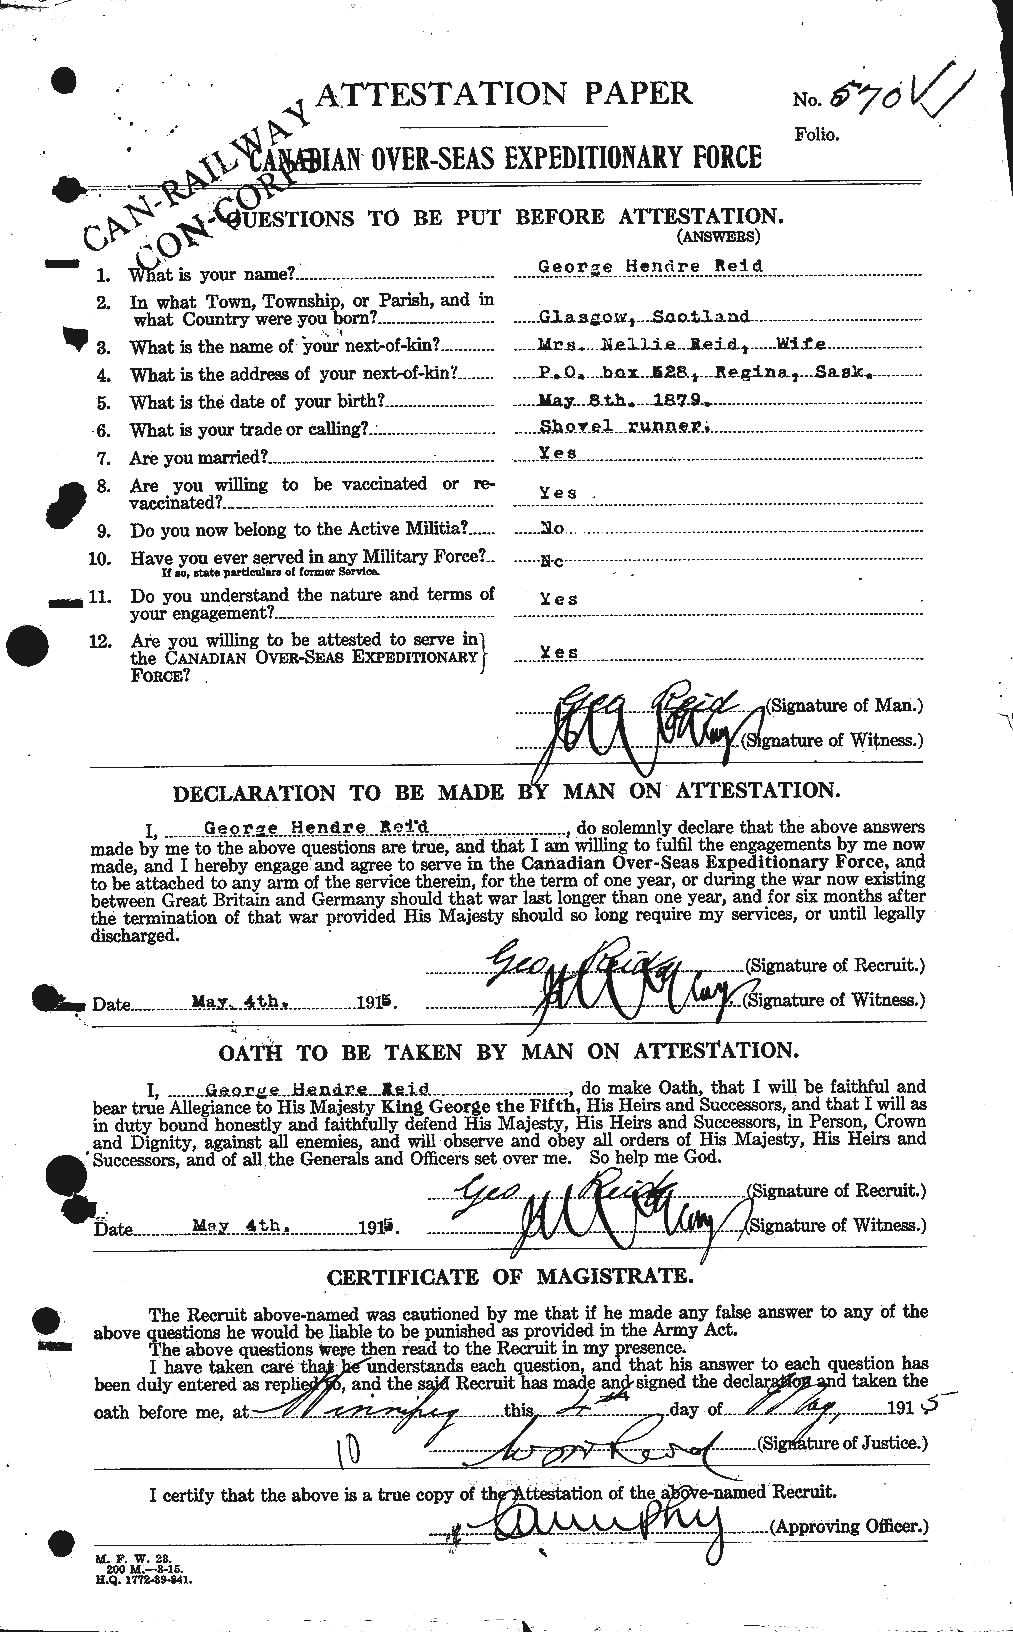 Personnel Records of the First World War - CEF 596300a